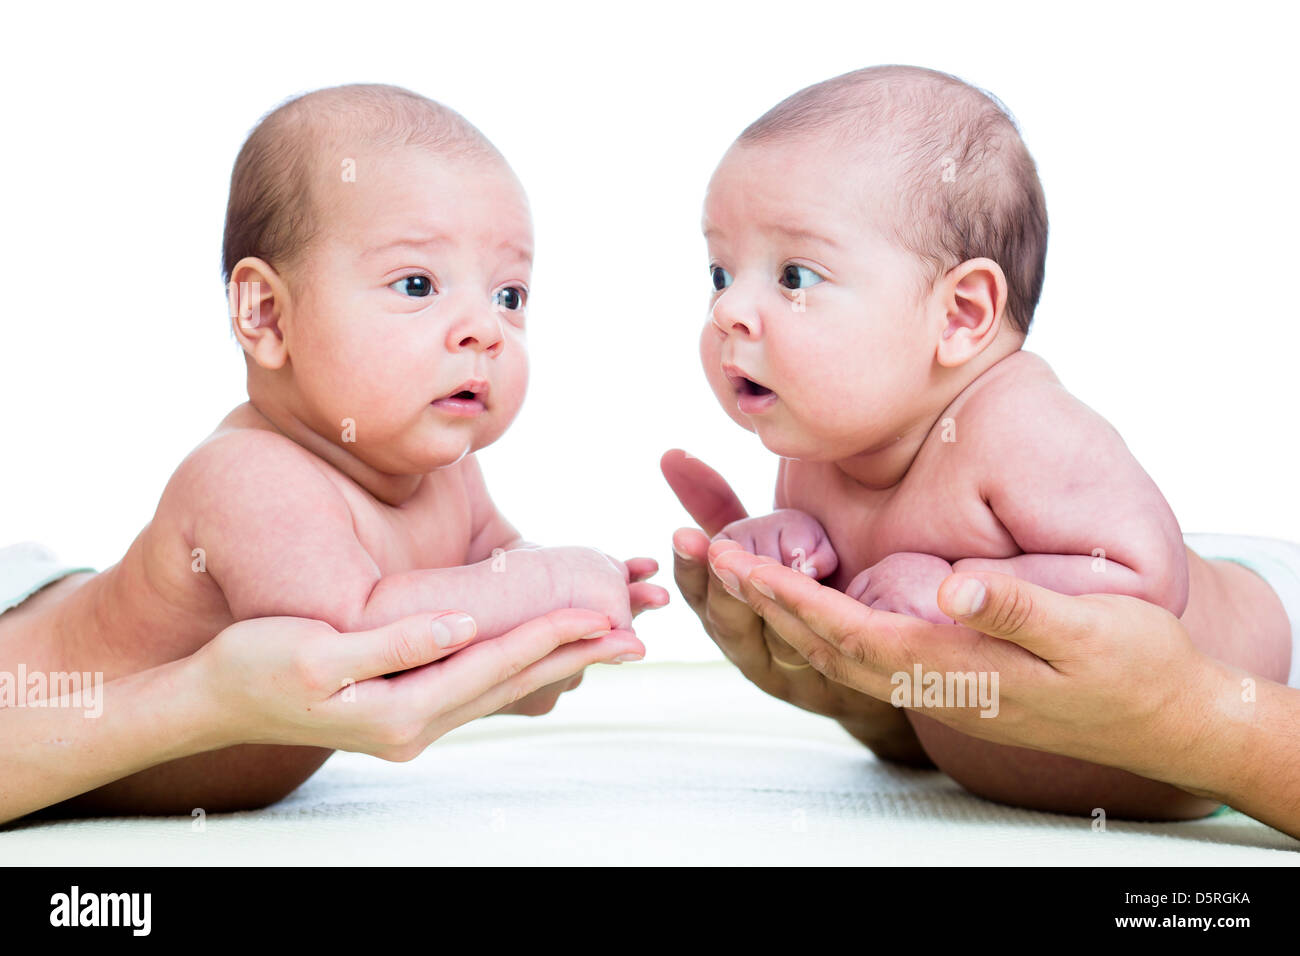 small babies twins on parental hands isolated on white background Stock Photo